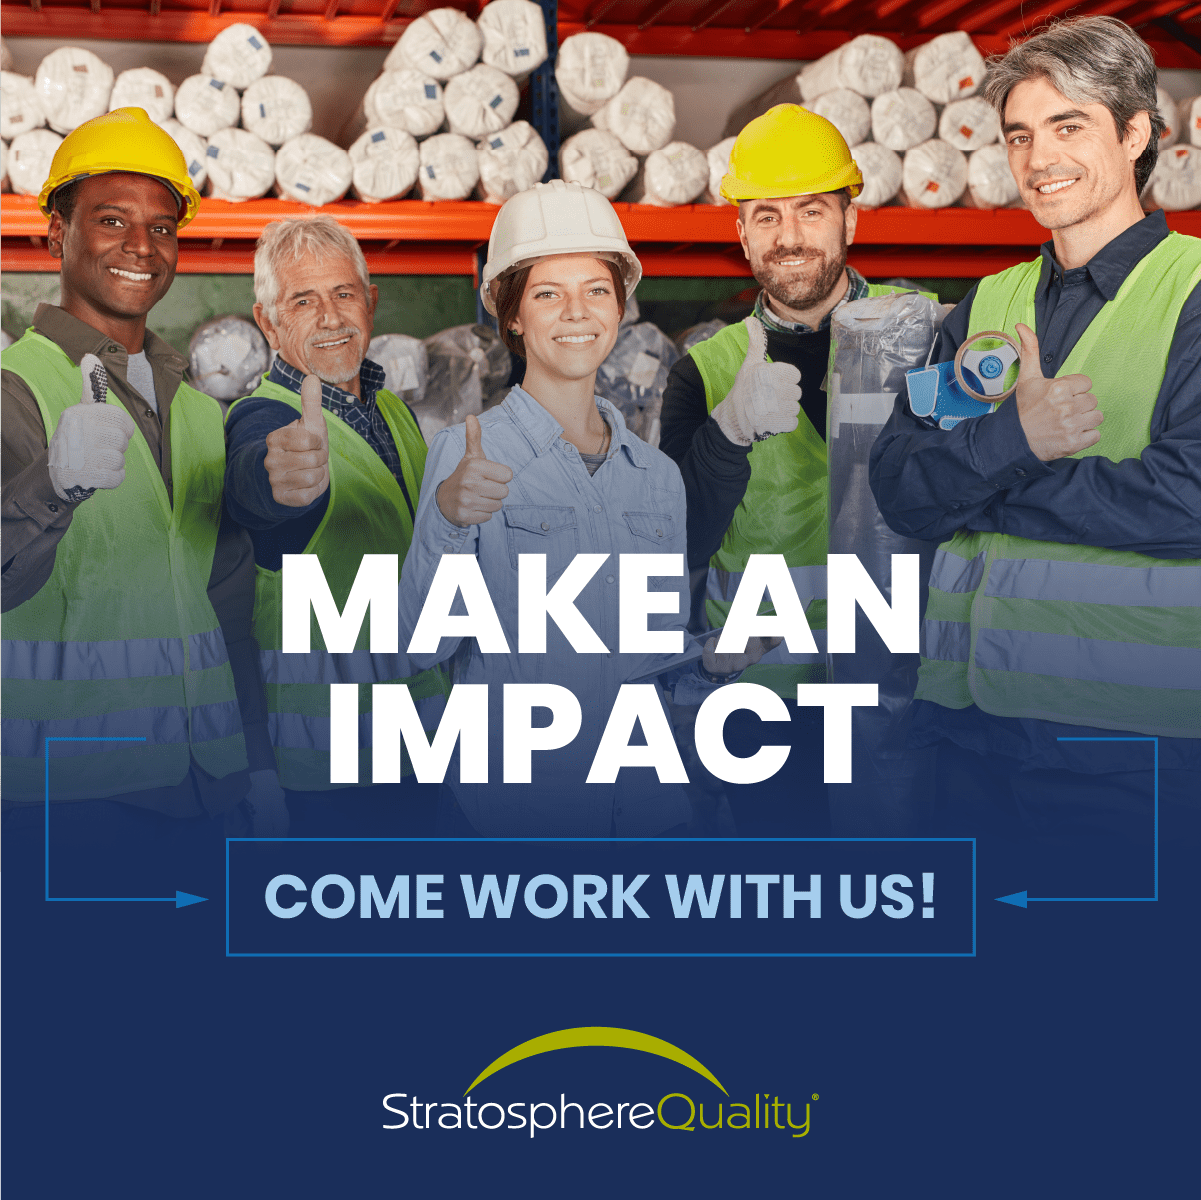 Make an impact - come work with us! Stratosphere quality